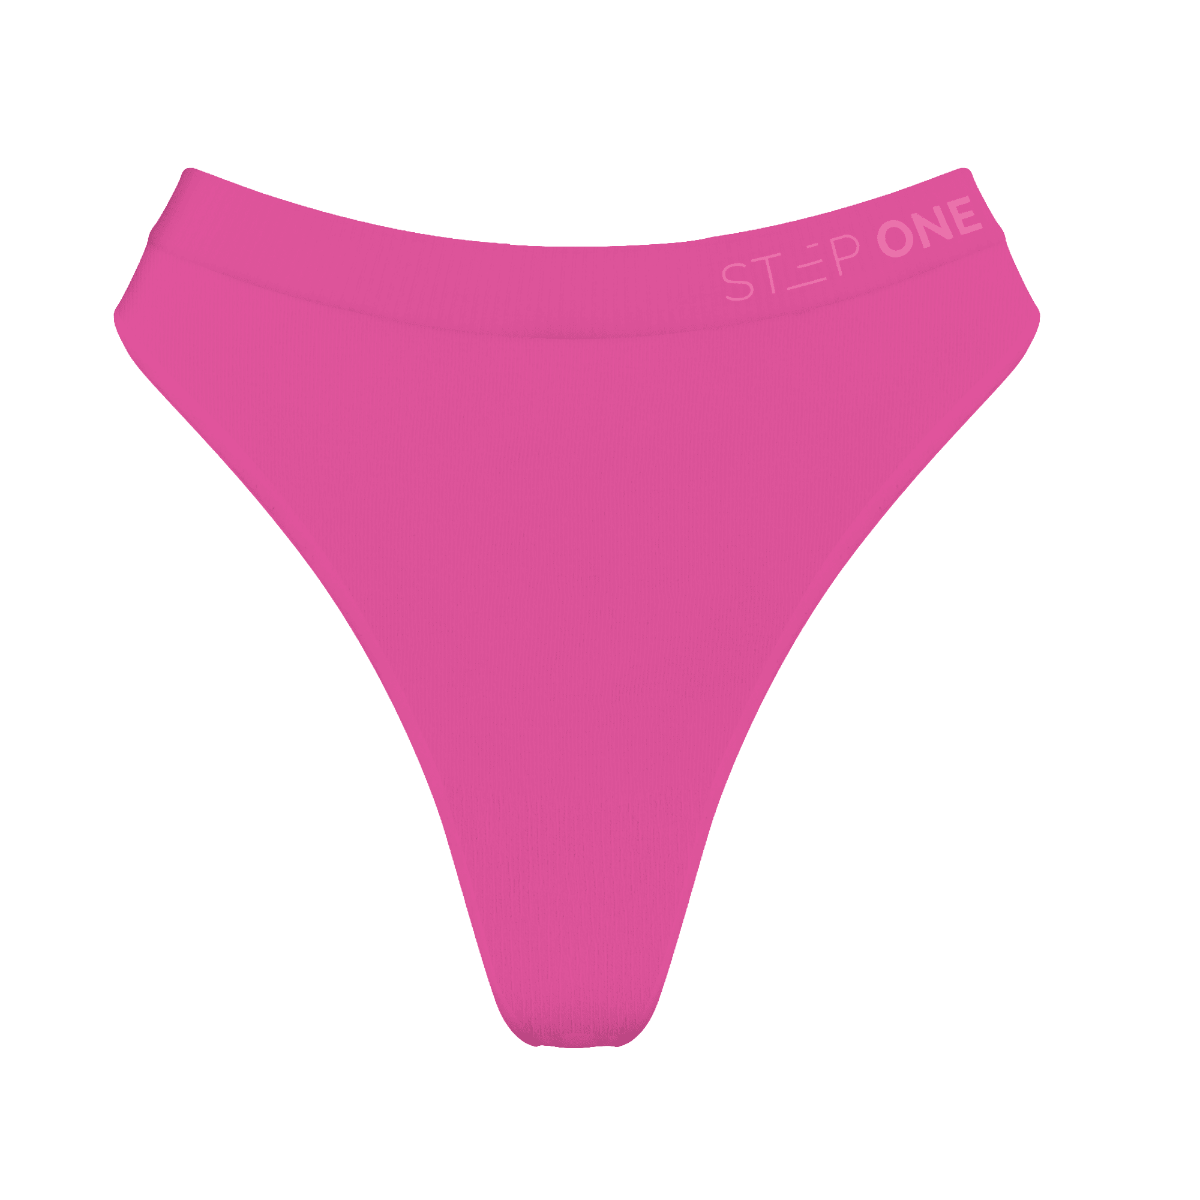 Step One, Women's SmoothFit Thong